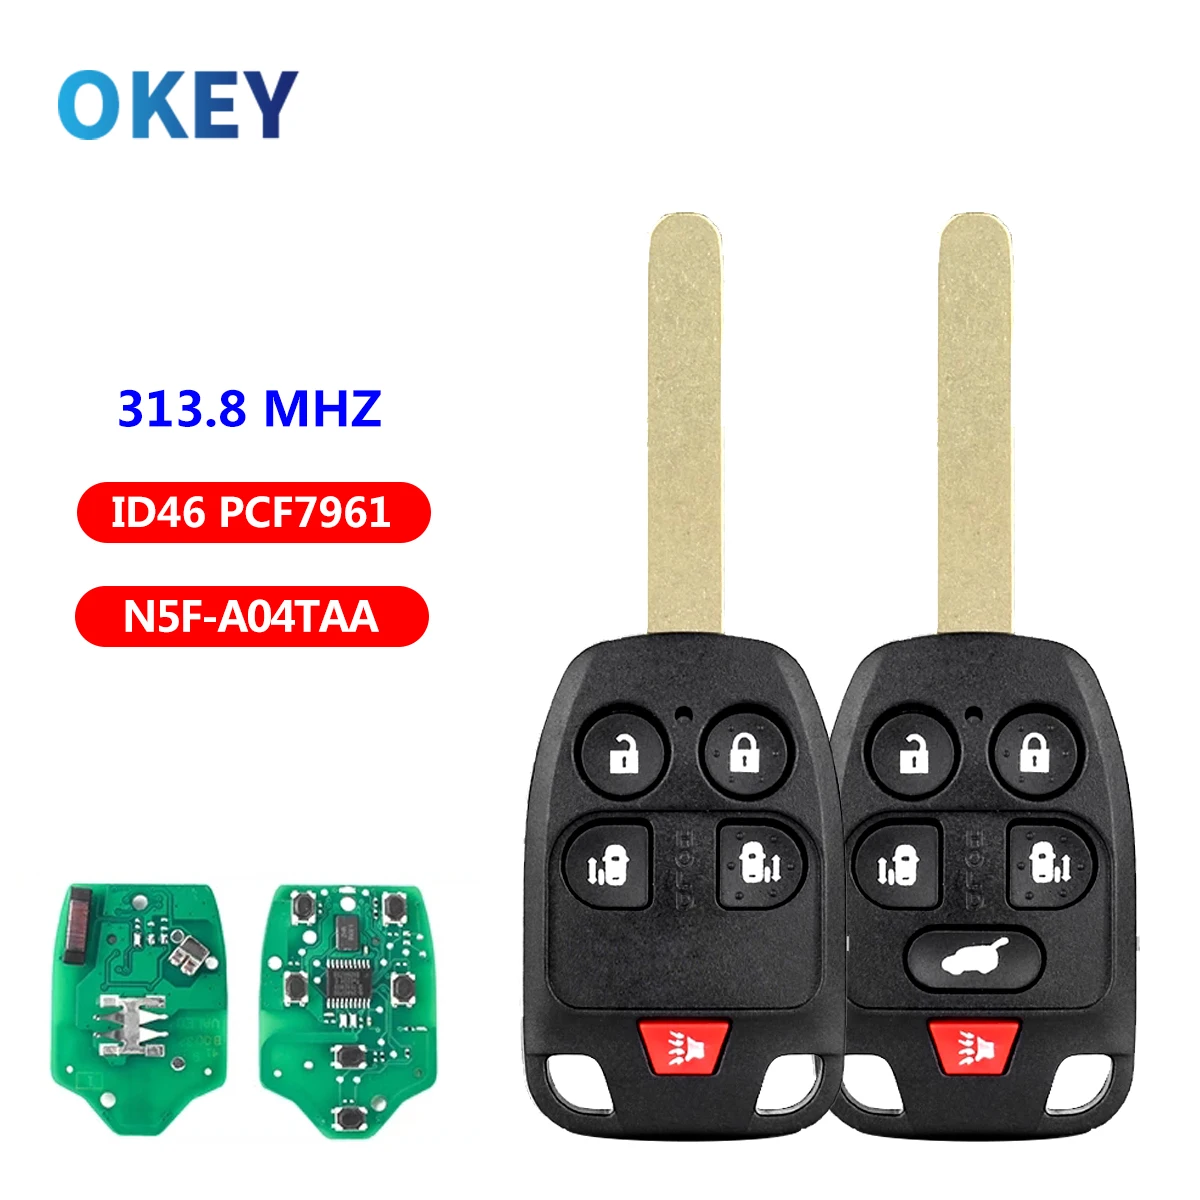 

Okey Remote Car Key ID46 PCF7961 Chip For Honda Odyssey 2011 2012 2013 2014 N5F-A04TAA 313.8Mhz 5/6 Buttons